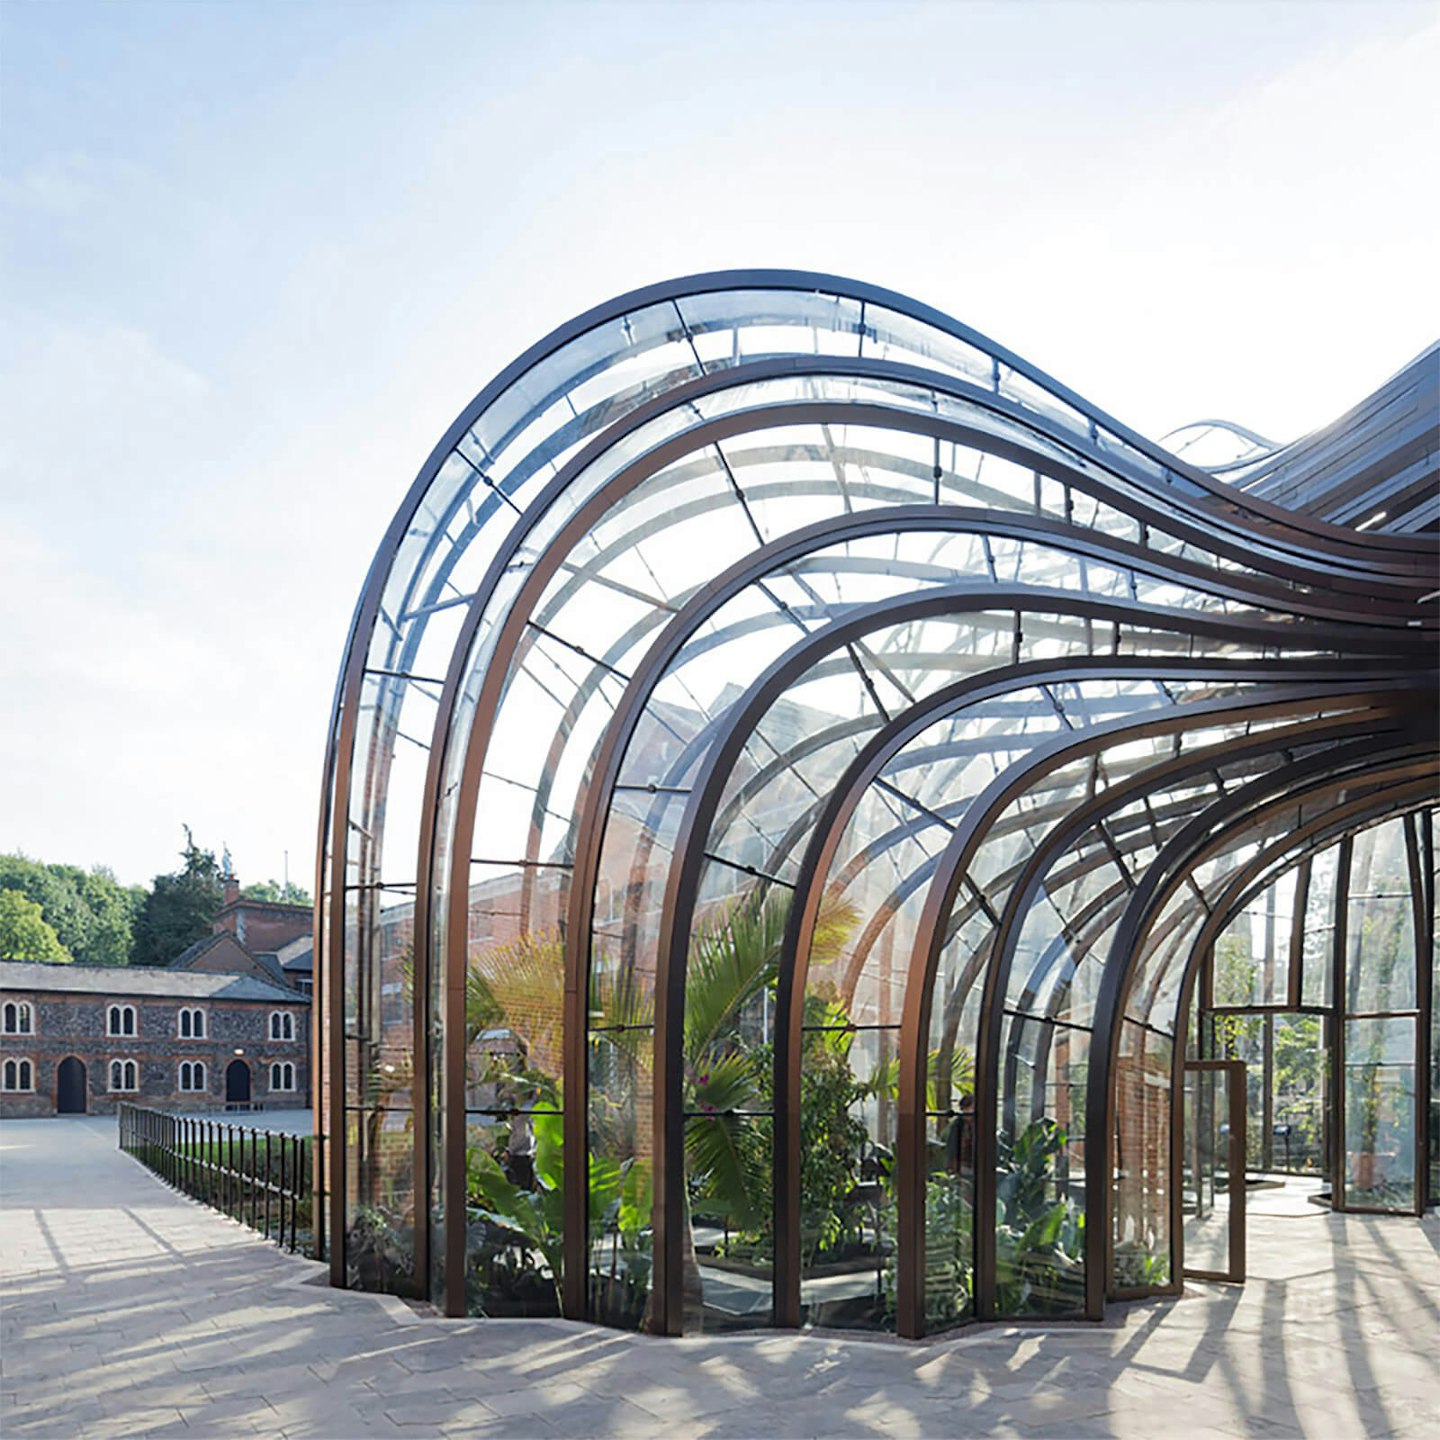 The Bombay Sapphire Distillery Self Discovery Tour With Gin Cocktail For Two